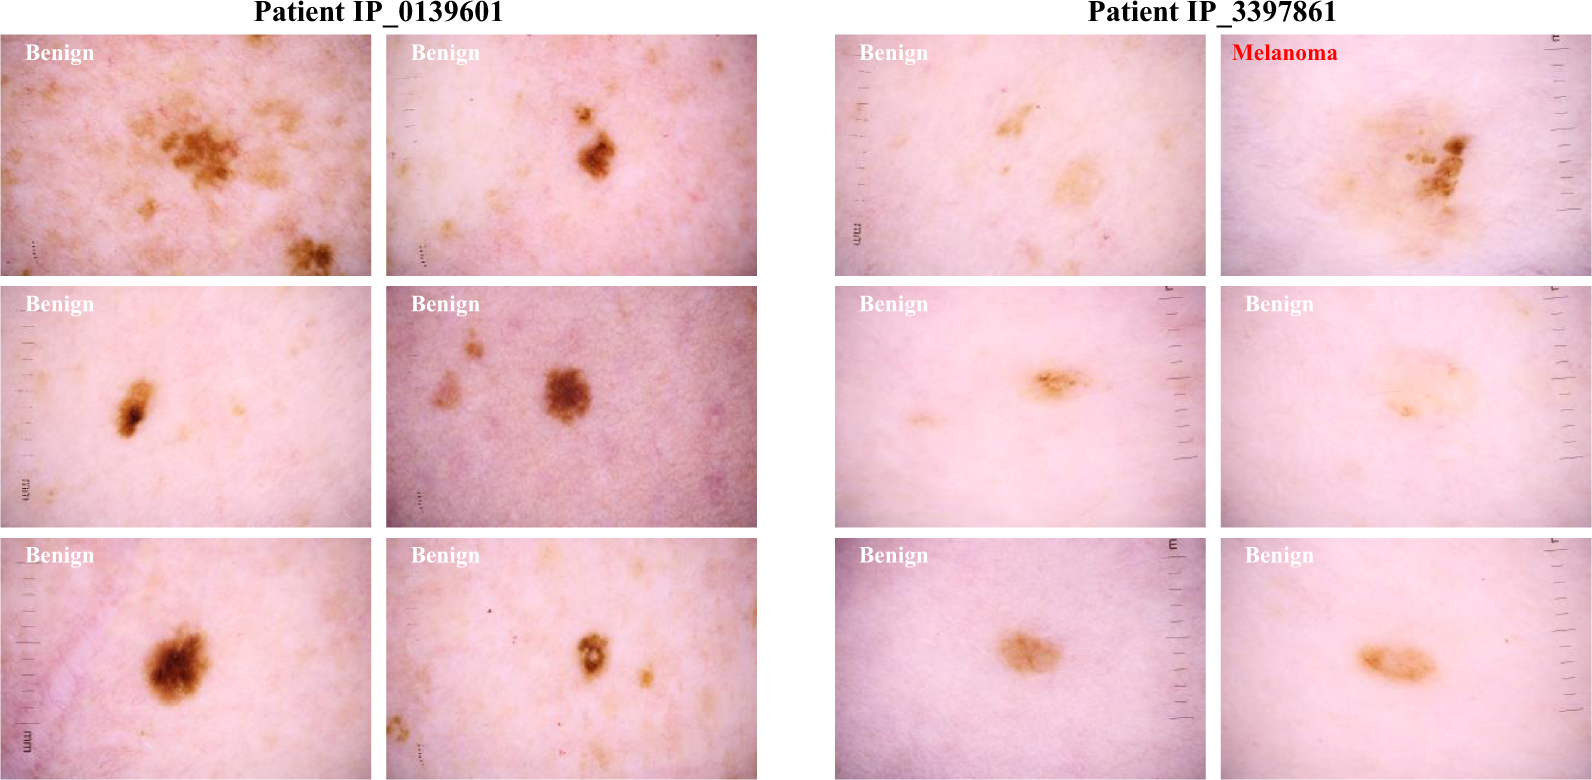 A patient-centric dataset of images and metadata for identifying melanomas  using clinical context | Scientific Data